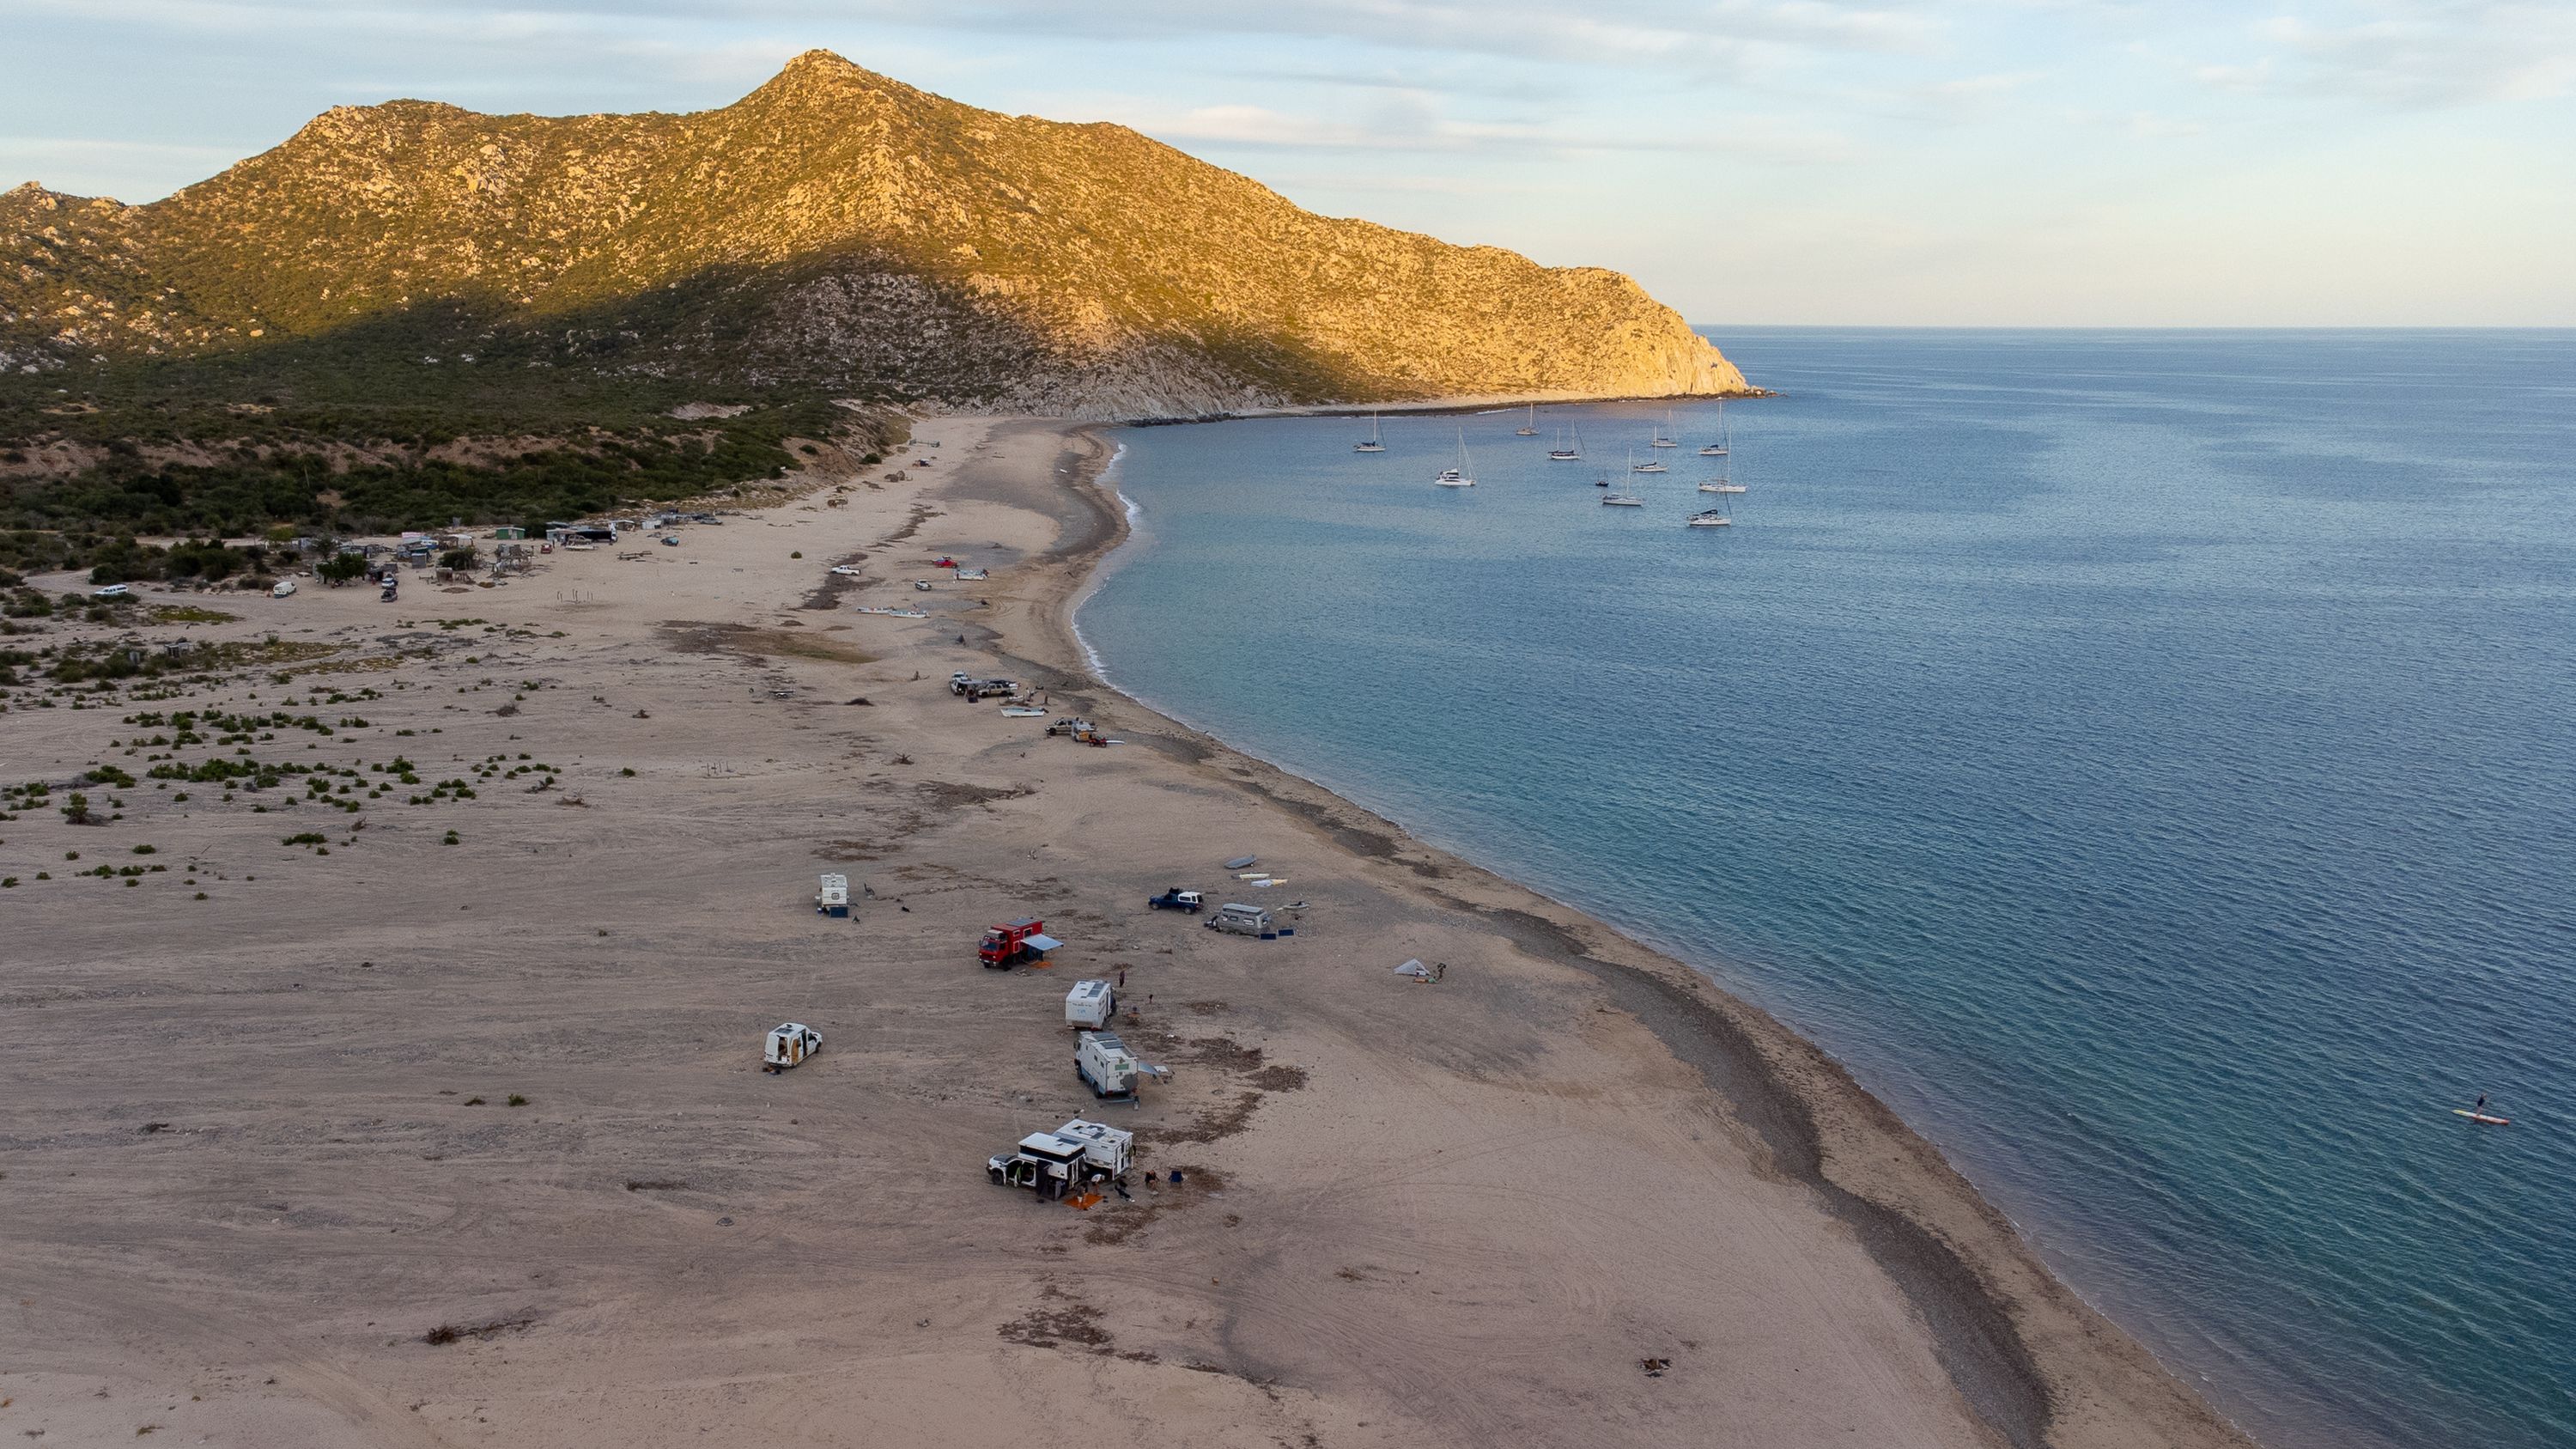 Playa Los Frailes: Overlanders, bike packers, fishermen and sailers sharing this little piece of paradise.